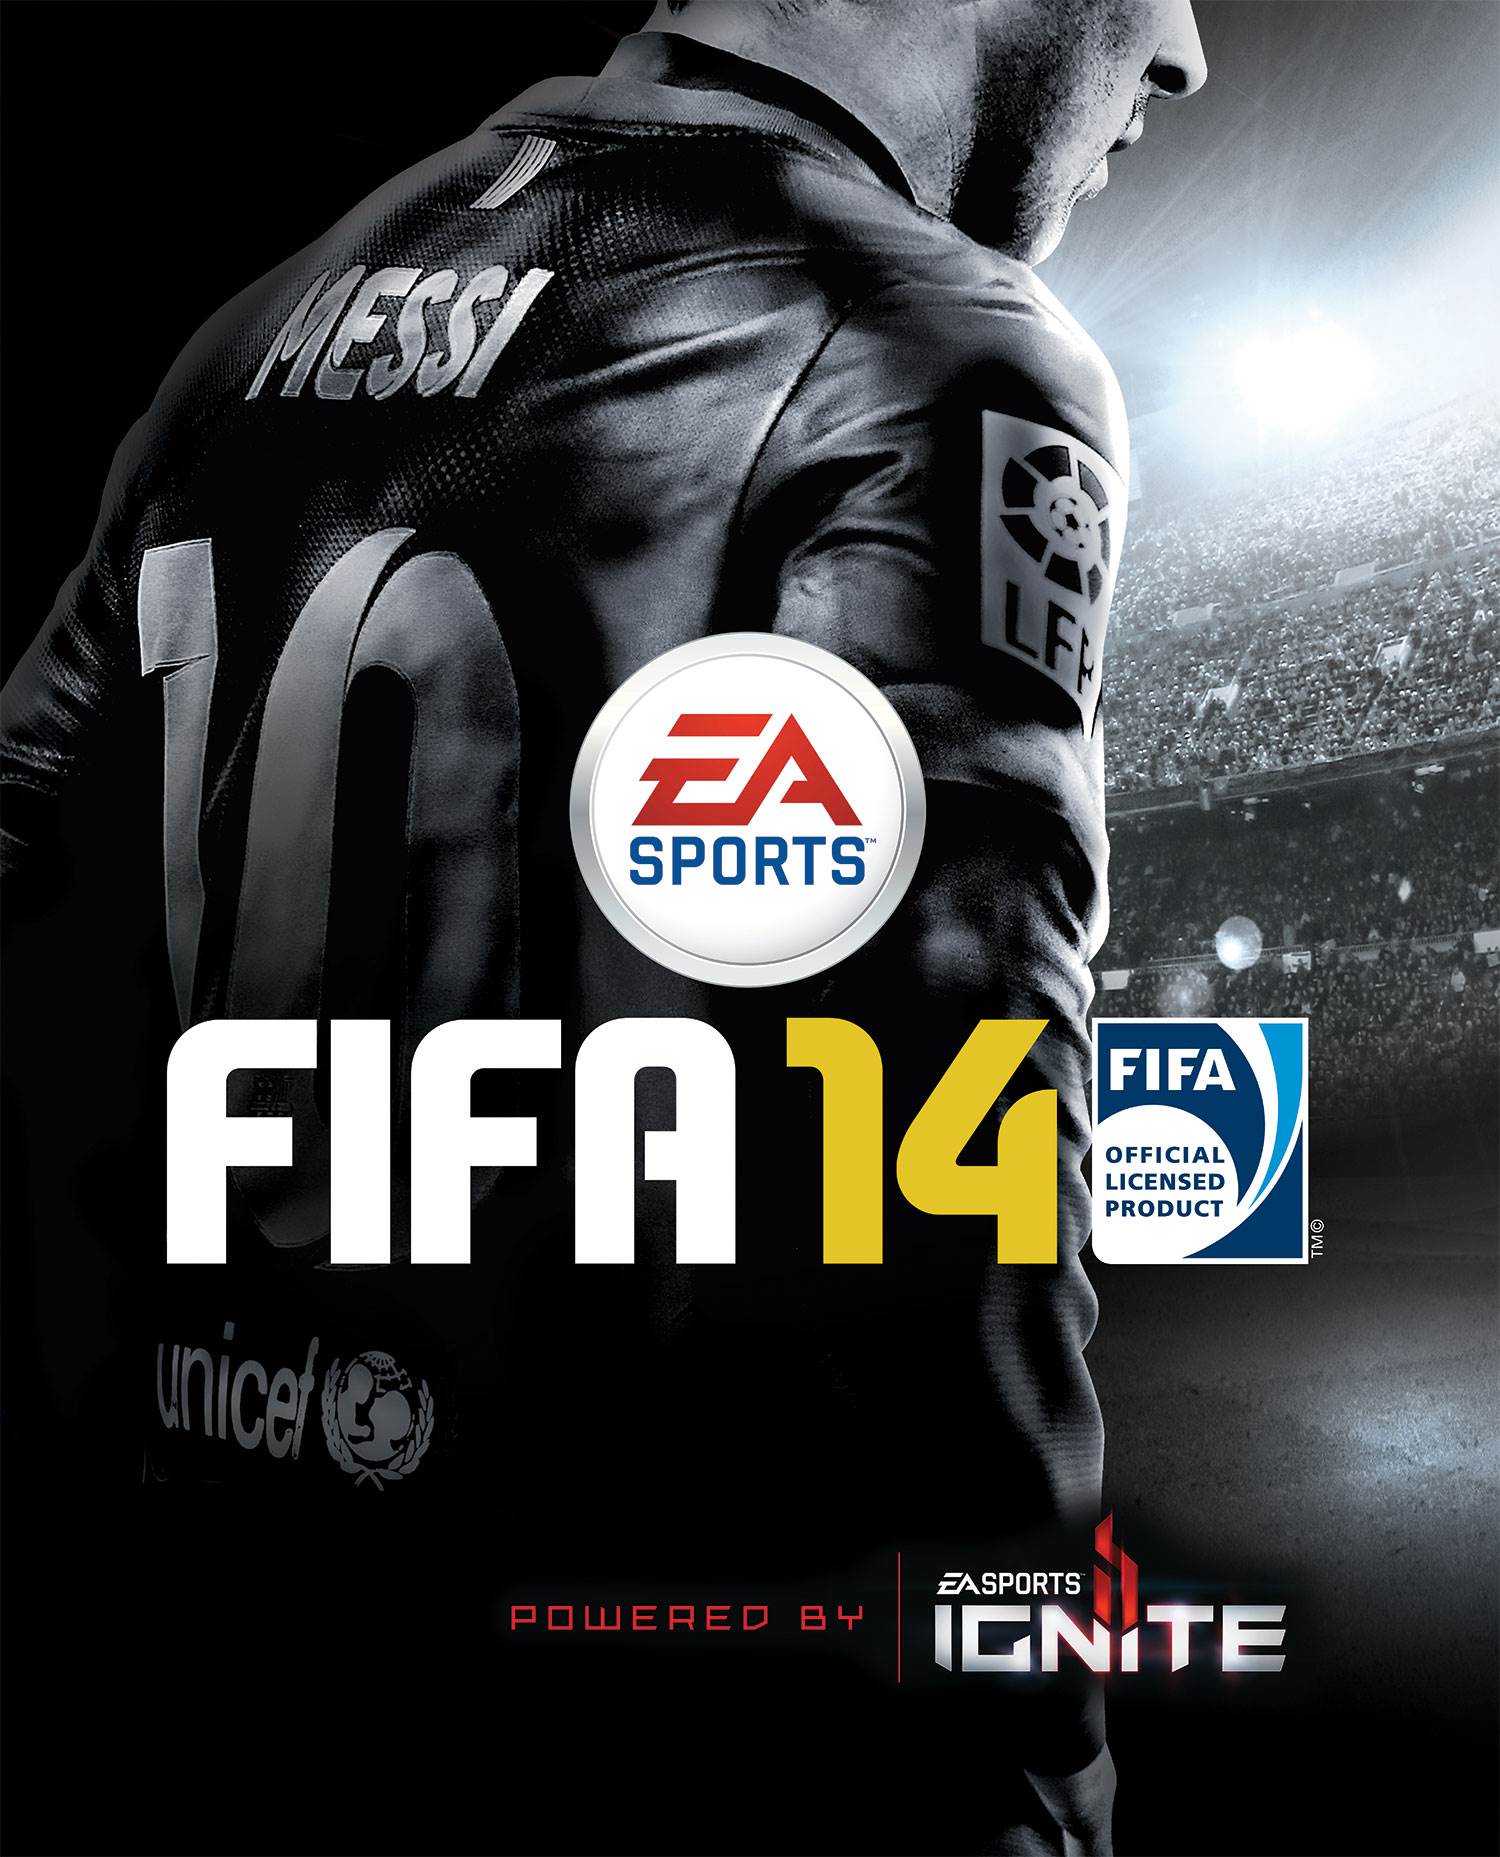 FIFA WALLPAPERS IN 2K « GamingBolt Video Game News